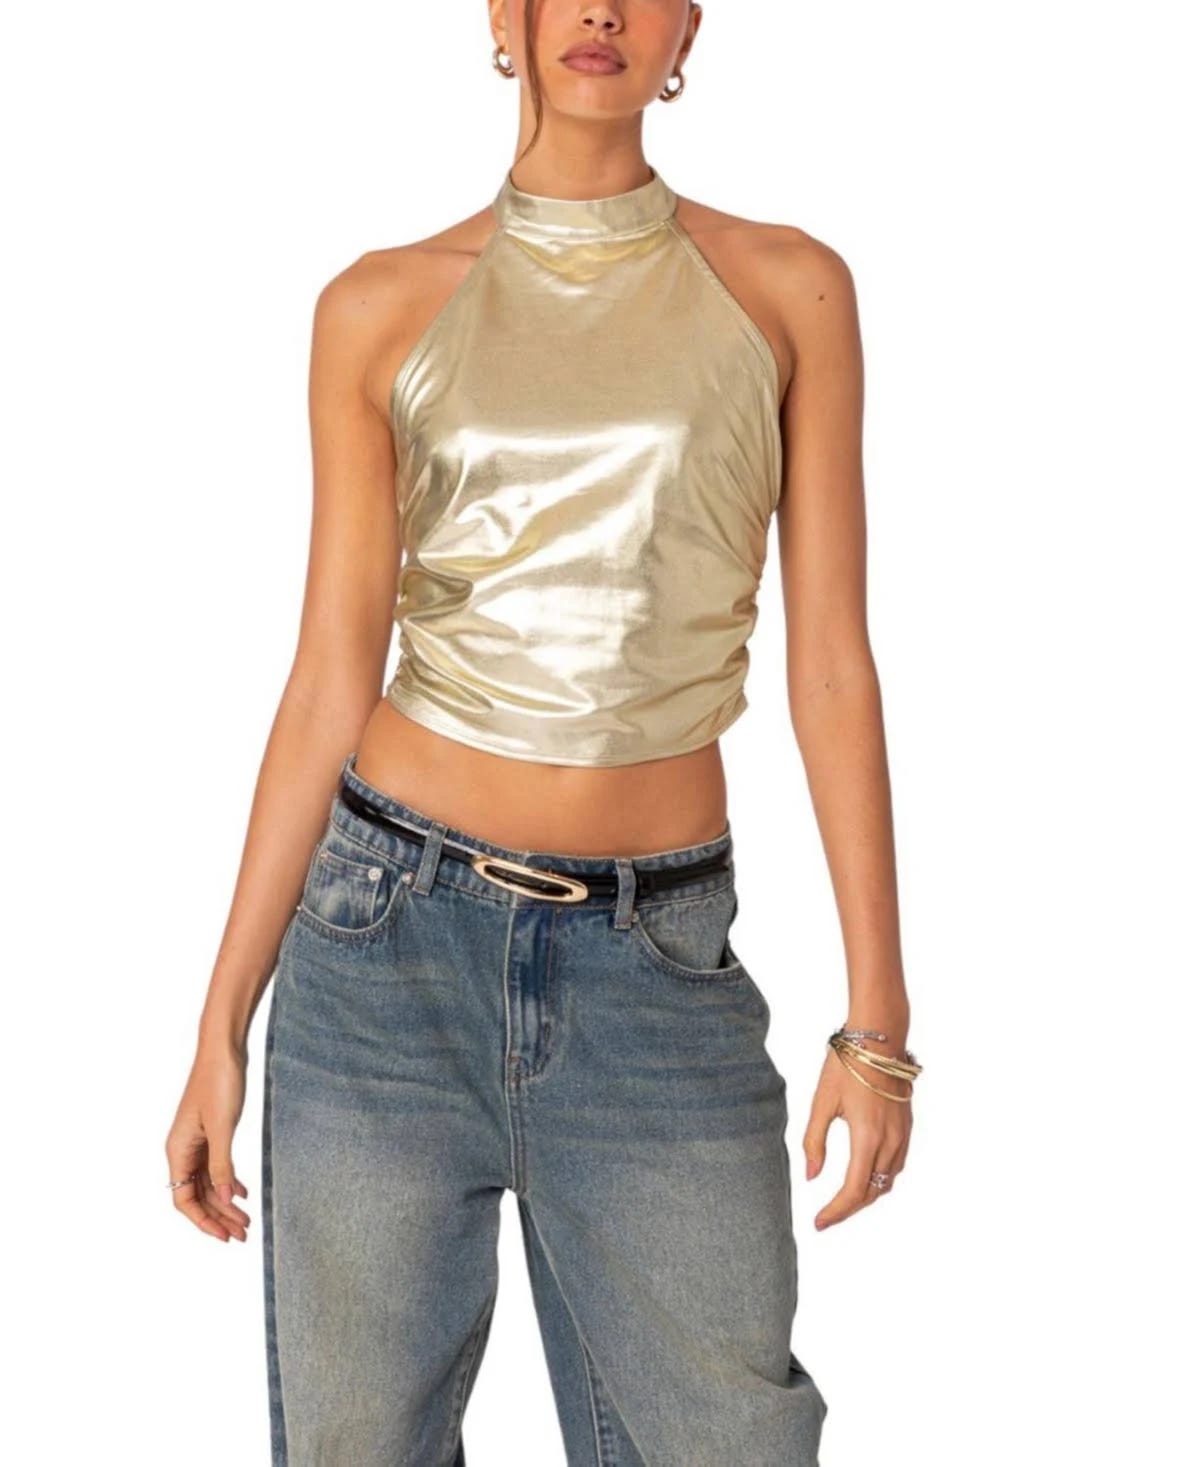 Sleek Gold Metallic Crop Top for Stylish Nights Out | Image